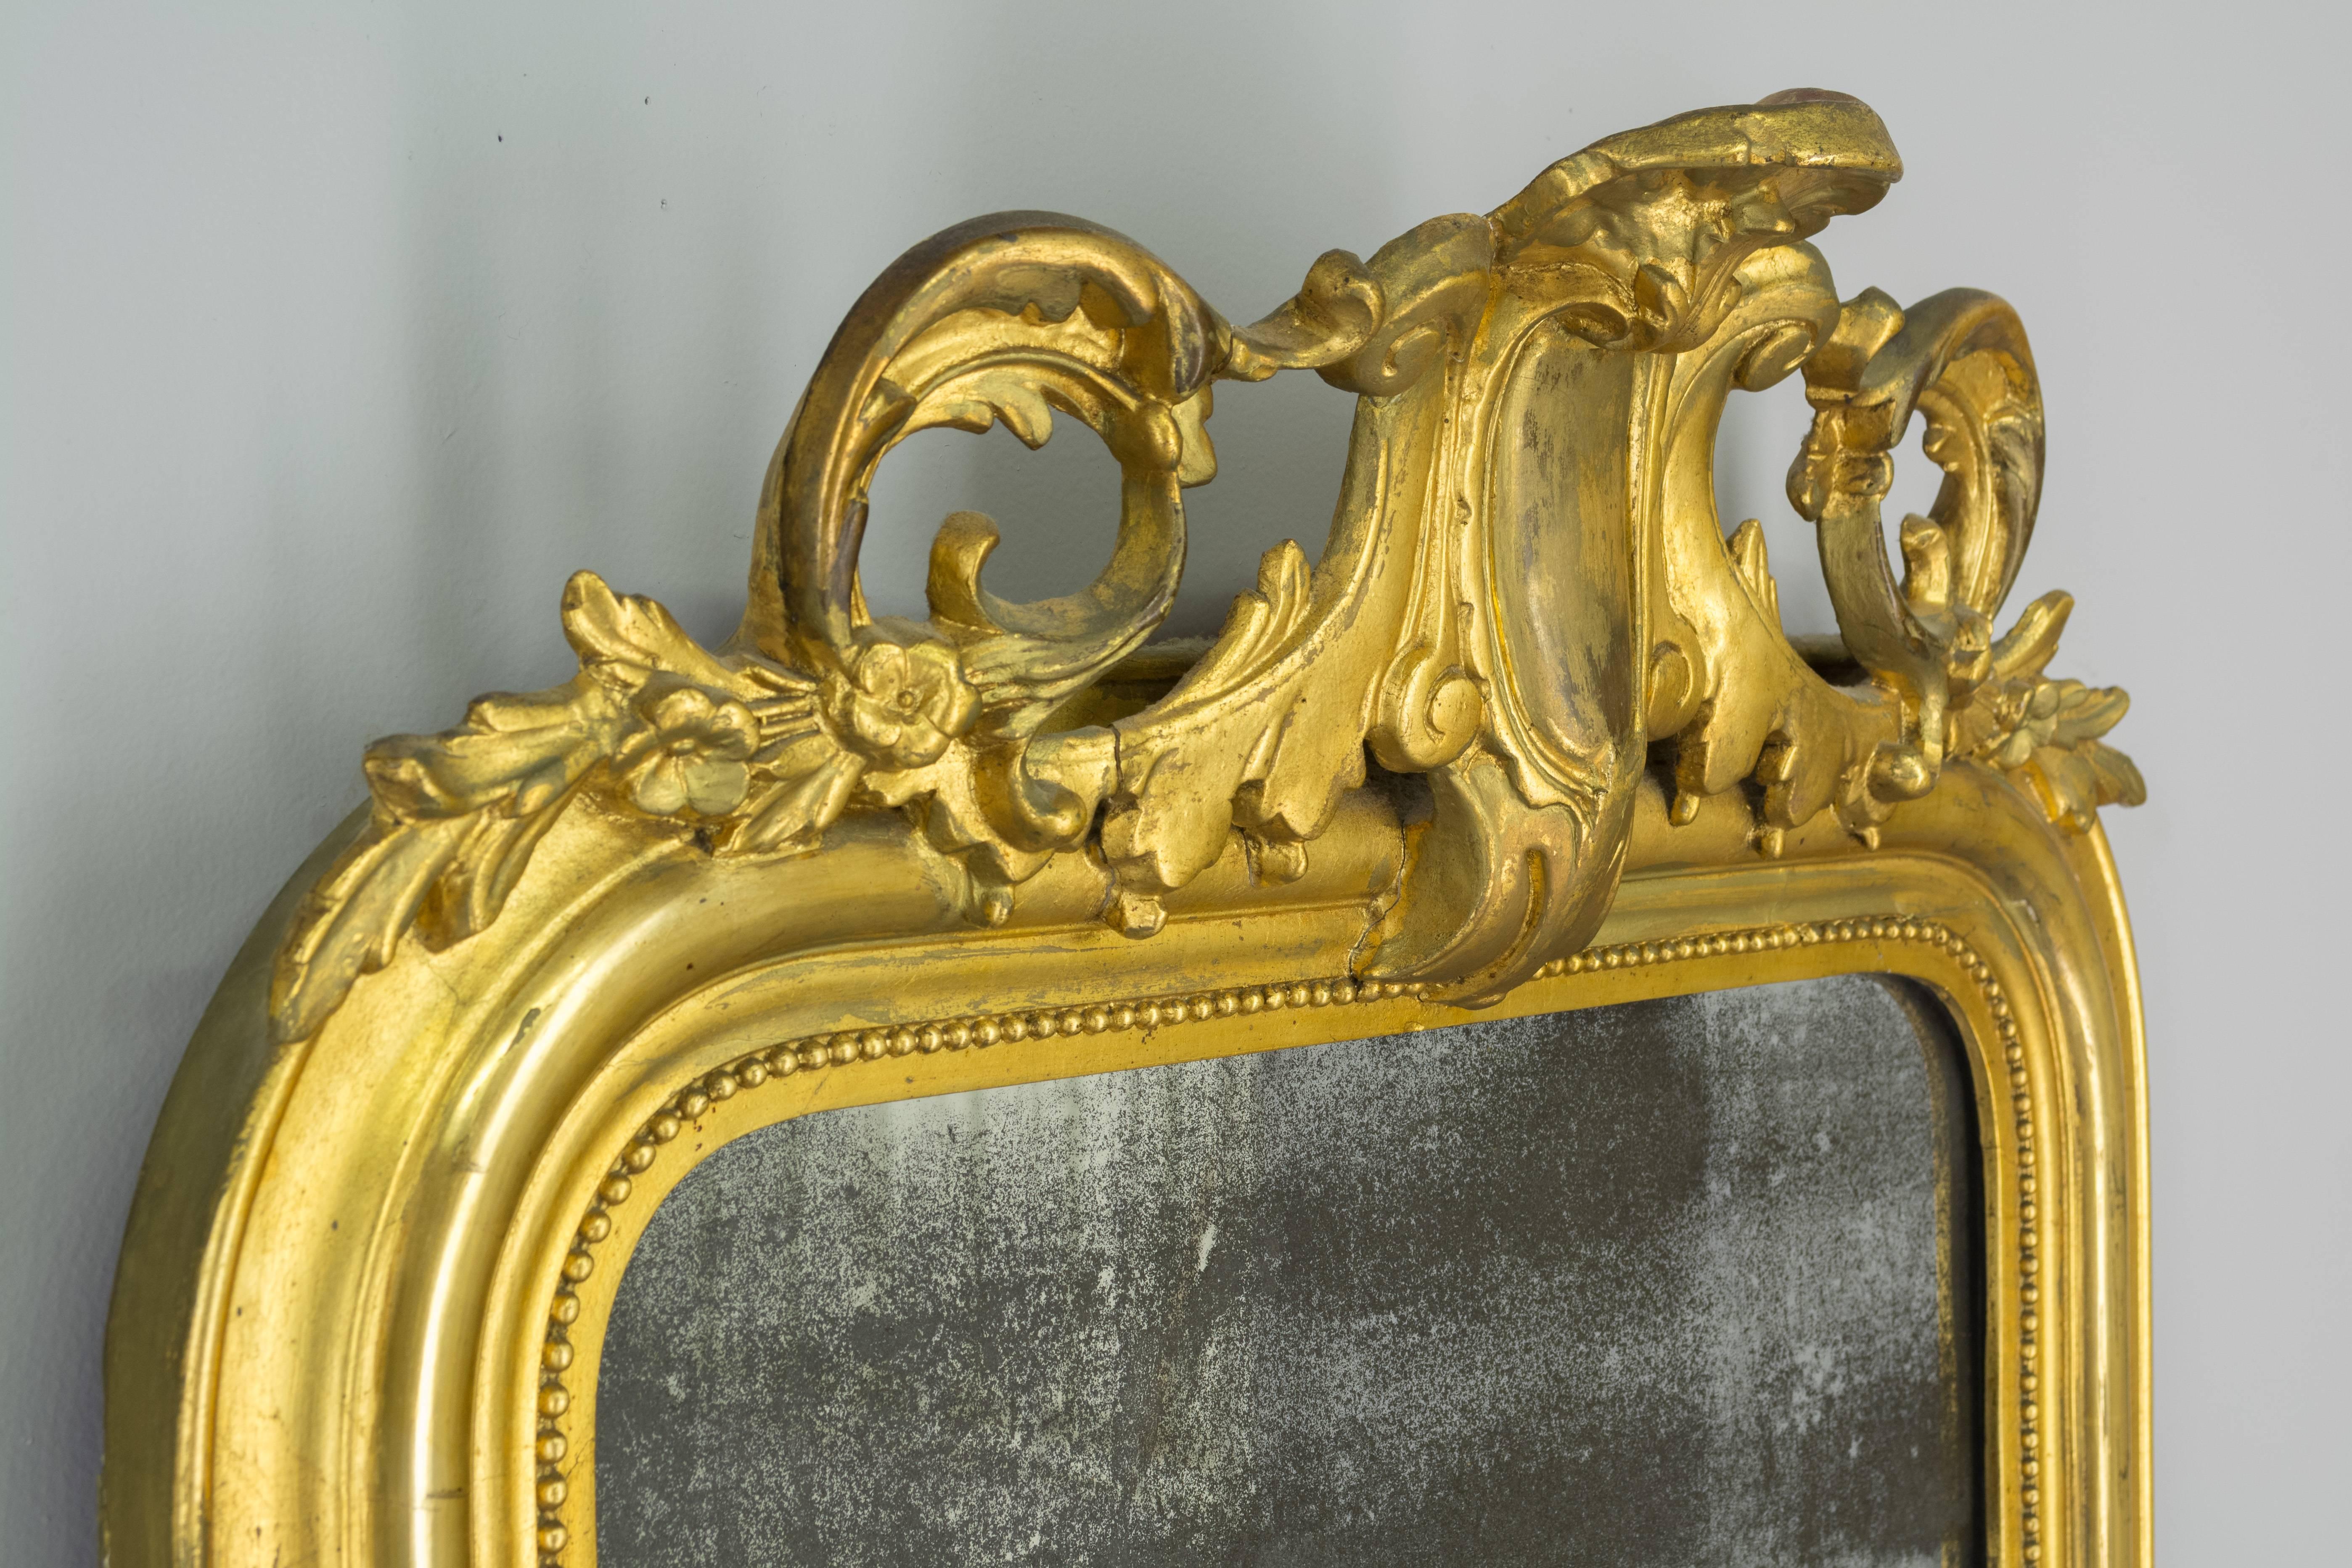 French Louis XV style gilded mirror with carved crest and corner details. Original looking glass with old silvering. Minor restorations to carvings and touch-ups to gilt. 43" H x 26" W x 1.5" D (6" deep at crest).